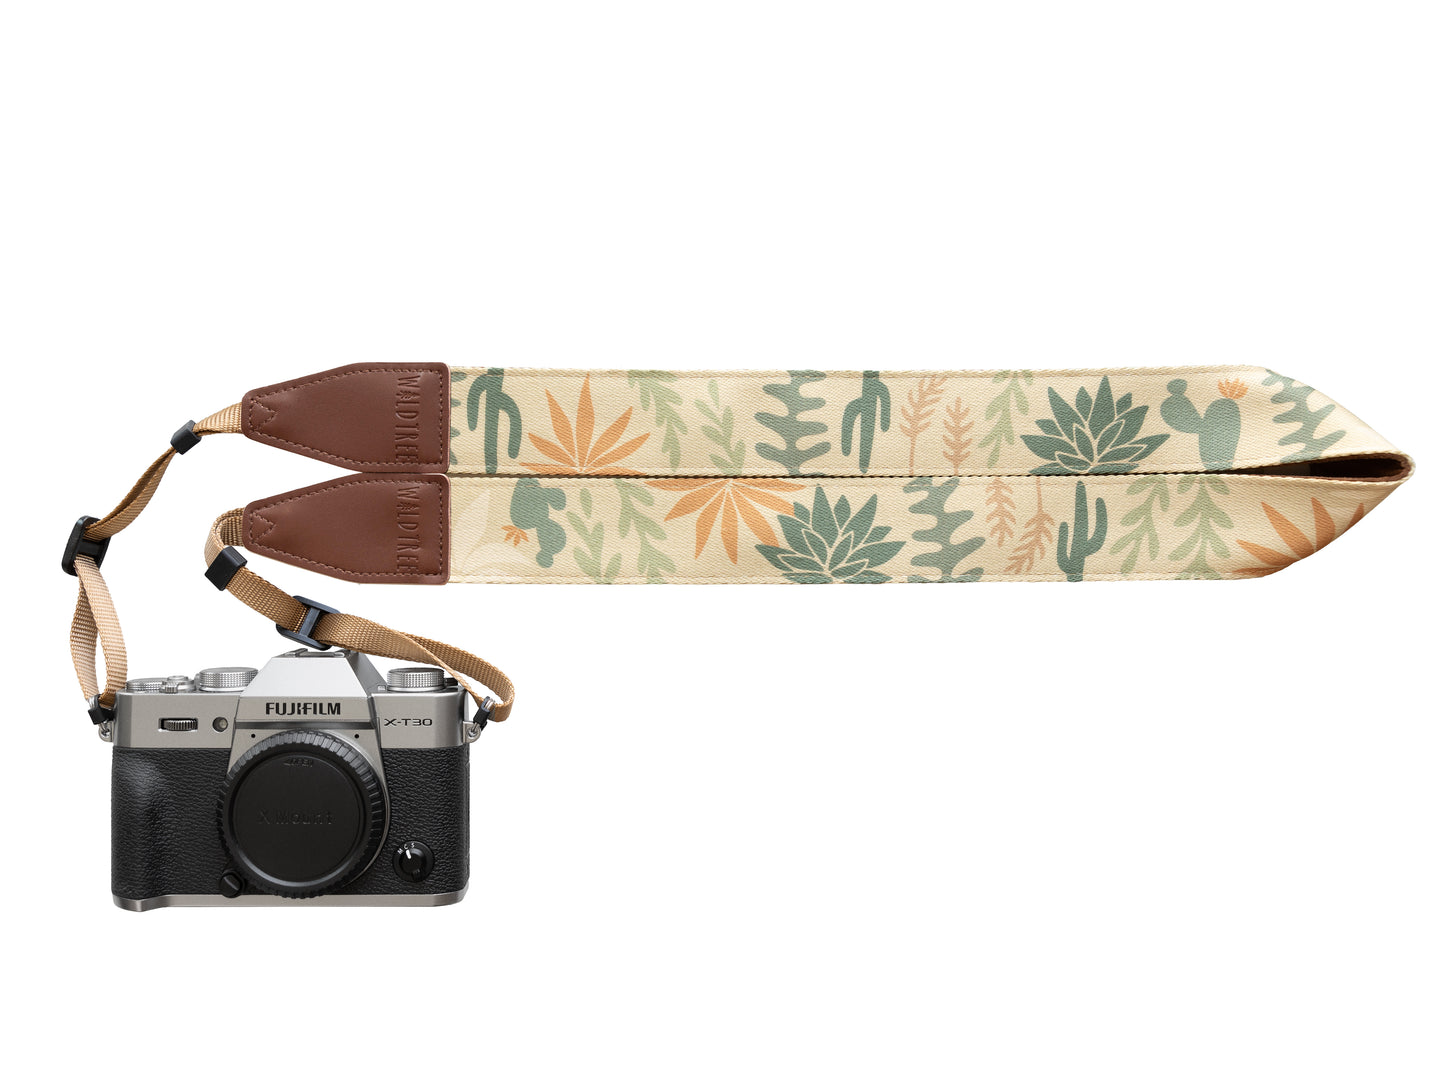 Wildtree camera strap wild desert design featuring cacti, succulents and other desert plants